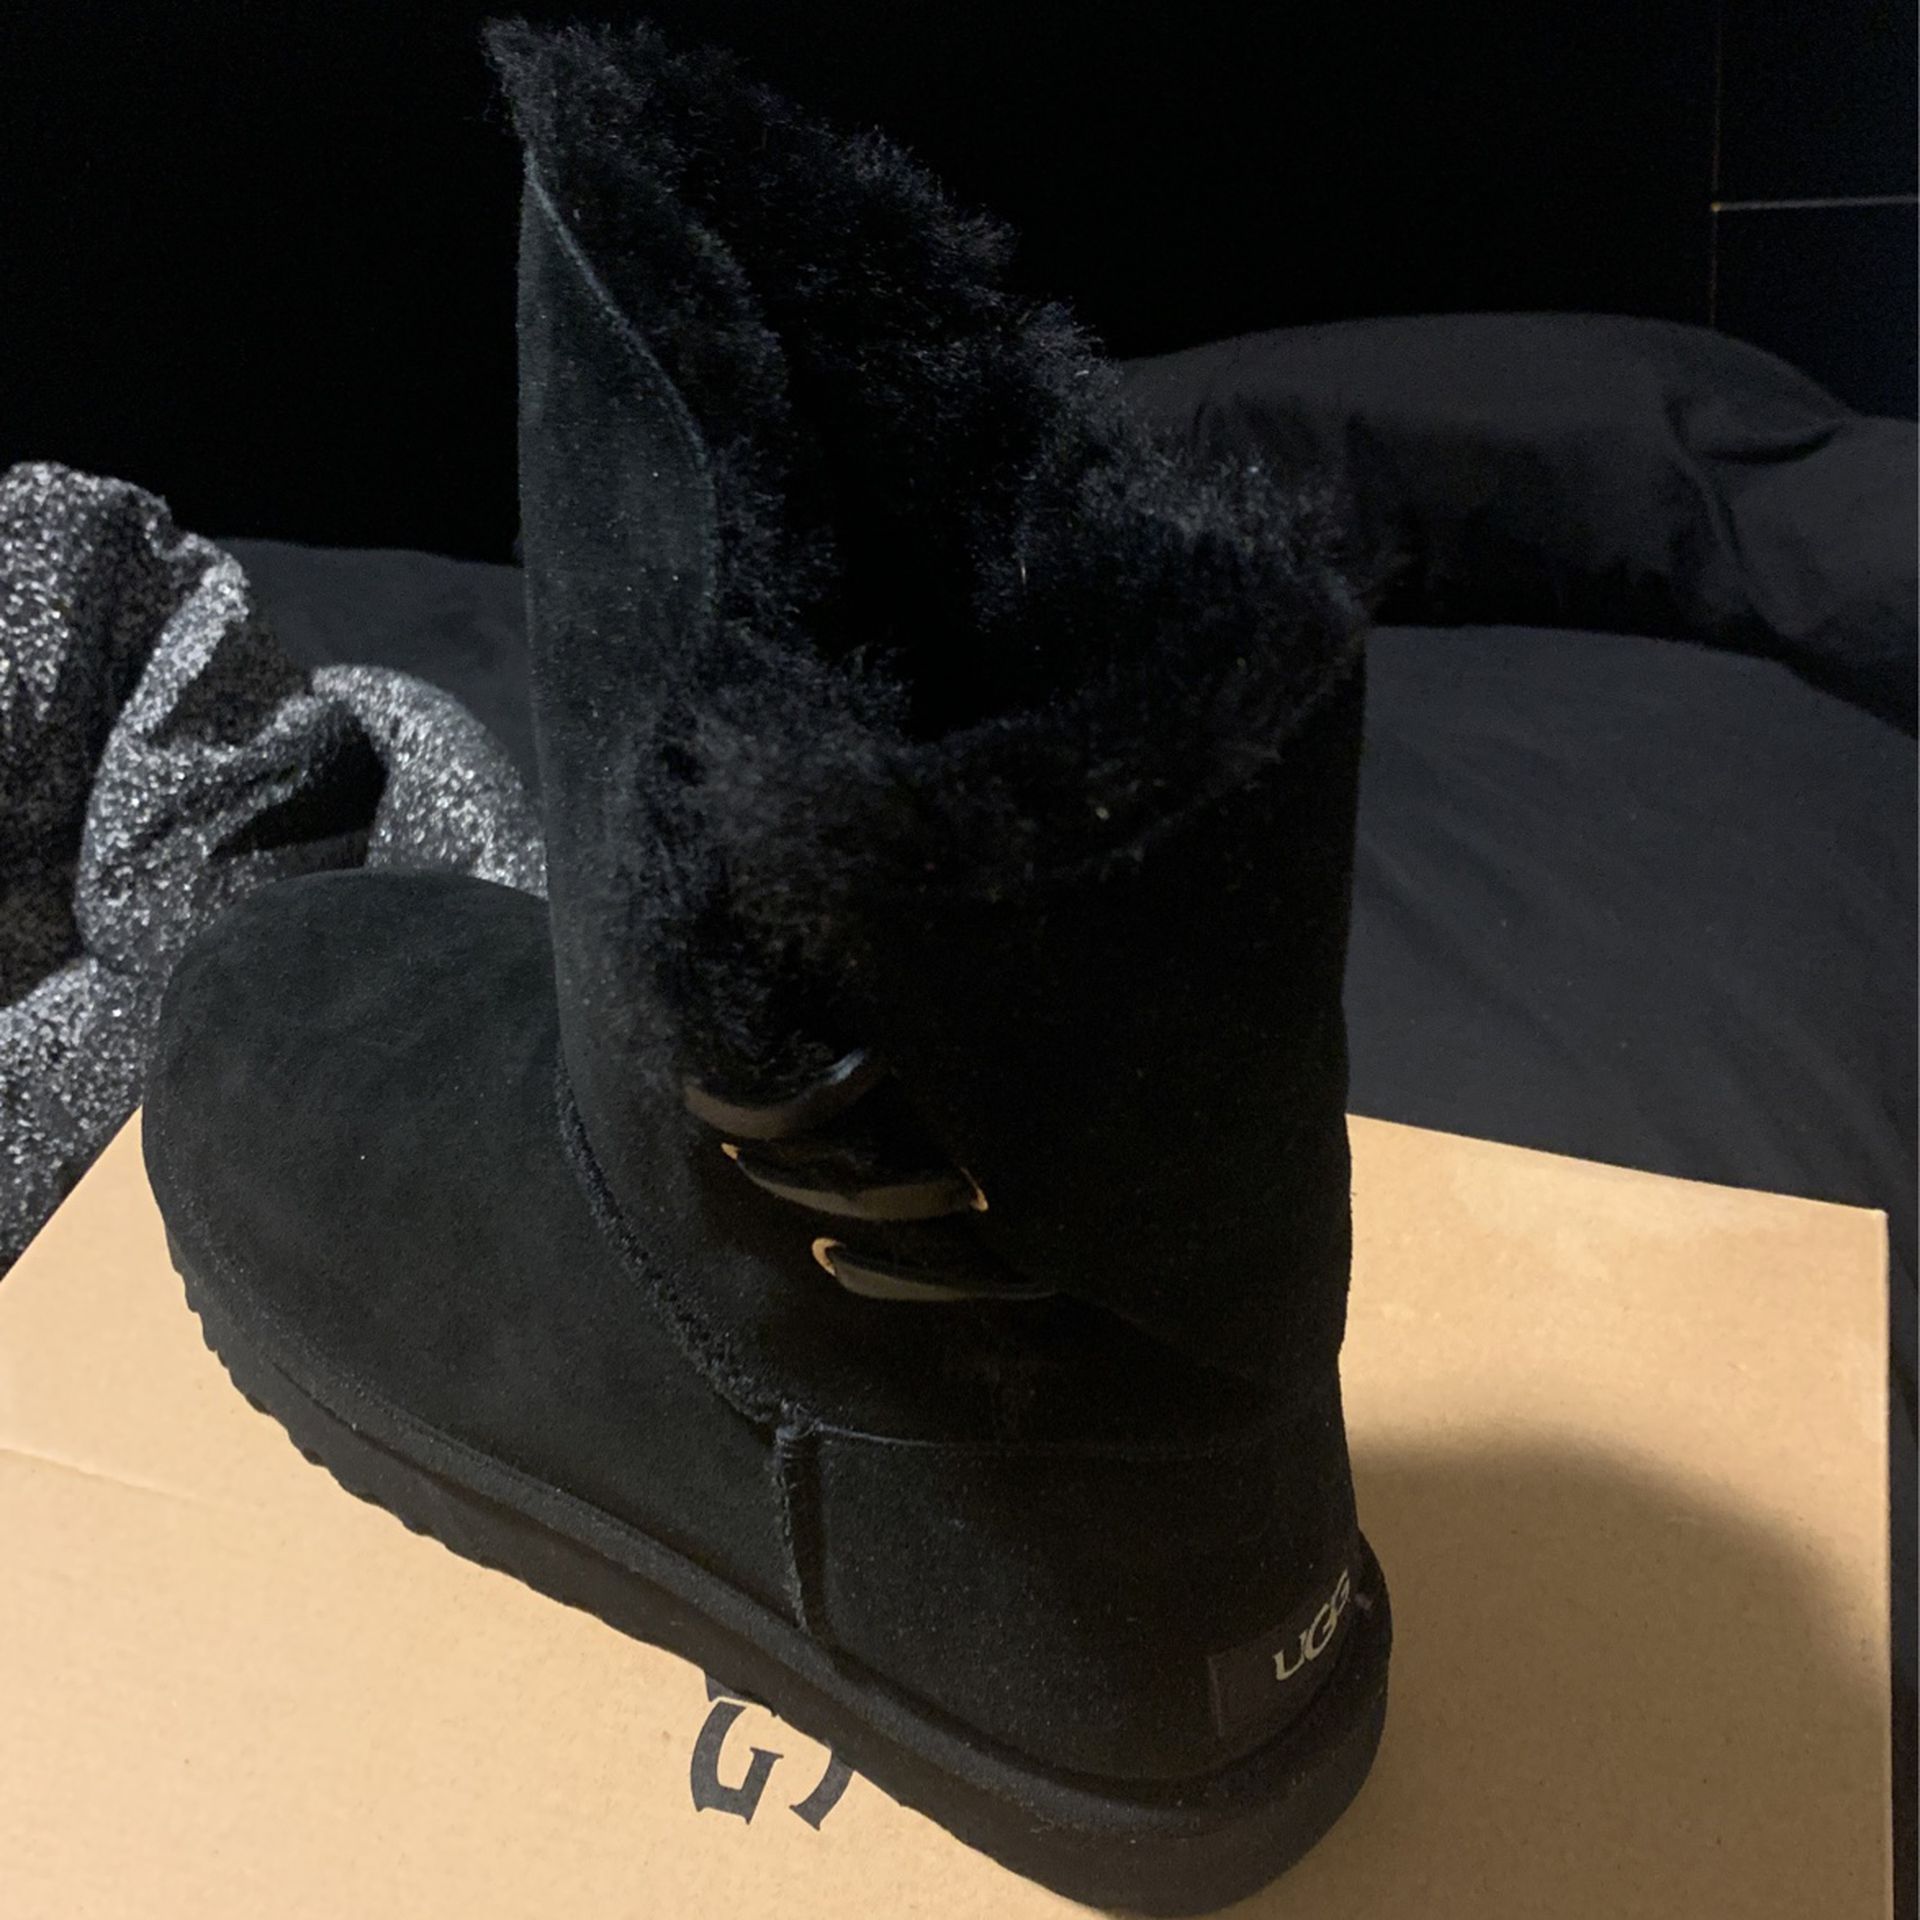 Black UGG Boots Size 10 NEVER WORN